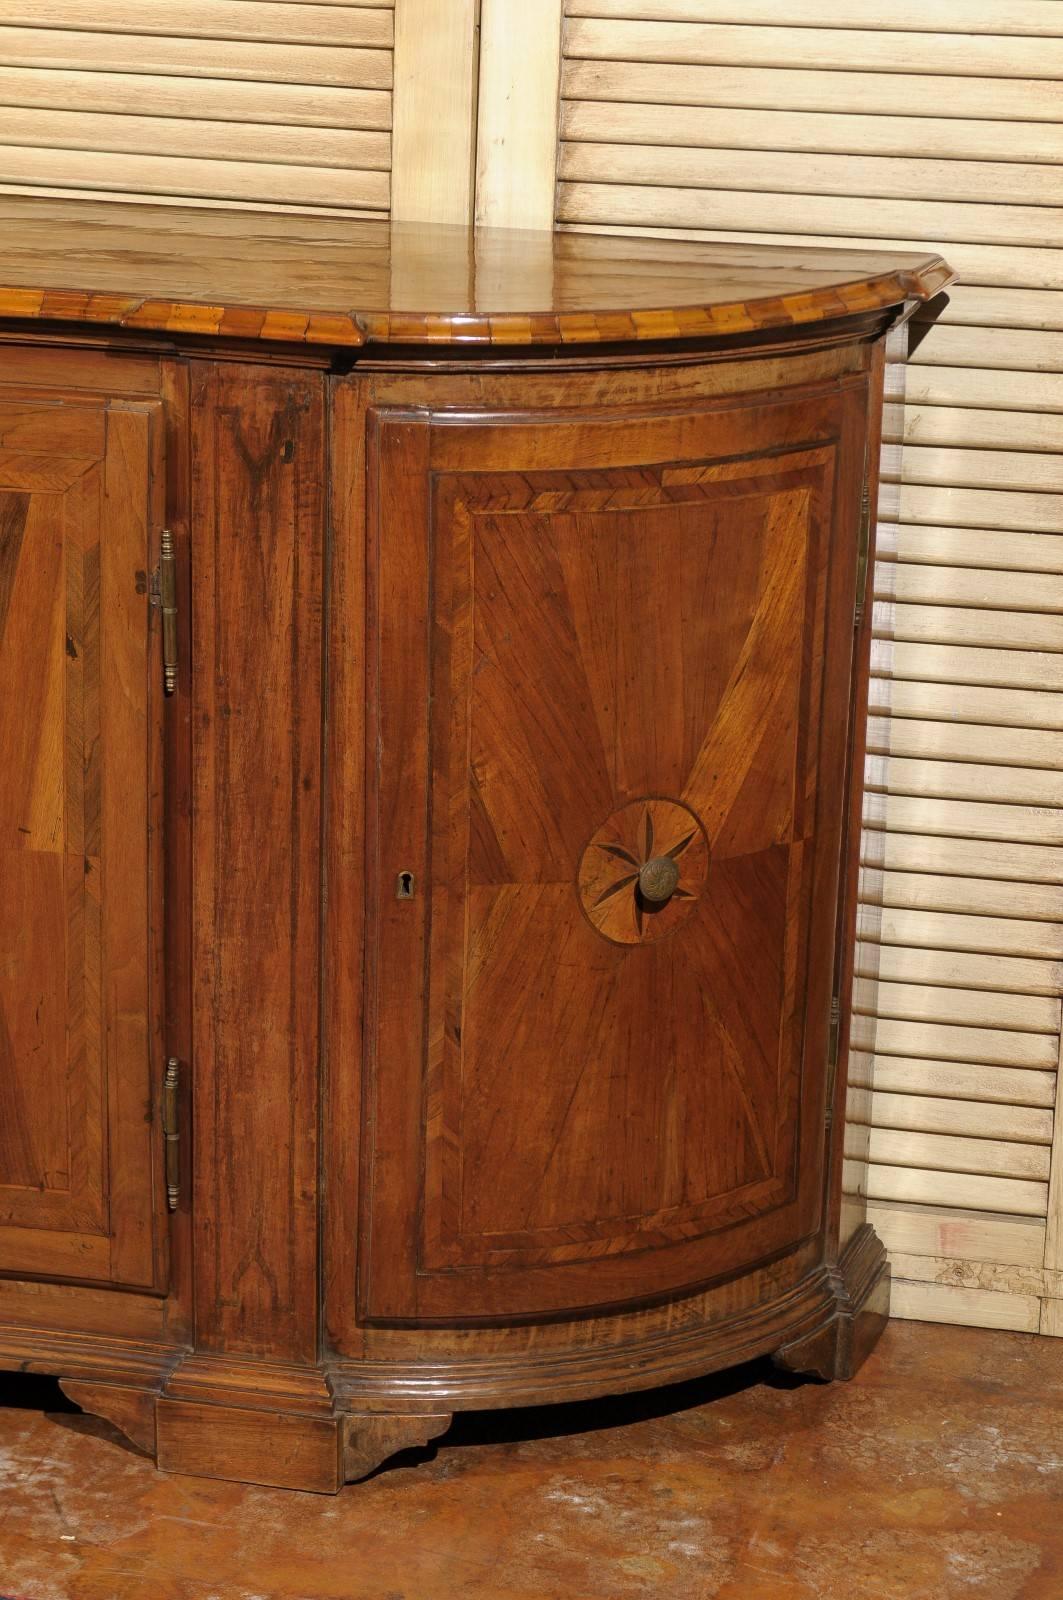 This exquisite Italian credenza from the mid 19th century features a beautiful walnut, satinwood and ebony inlaid body. The serpentine top is quarter-veneered with a delicate flower marquetry motif in its center and thin banding on the surround, and